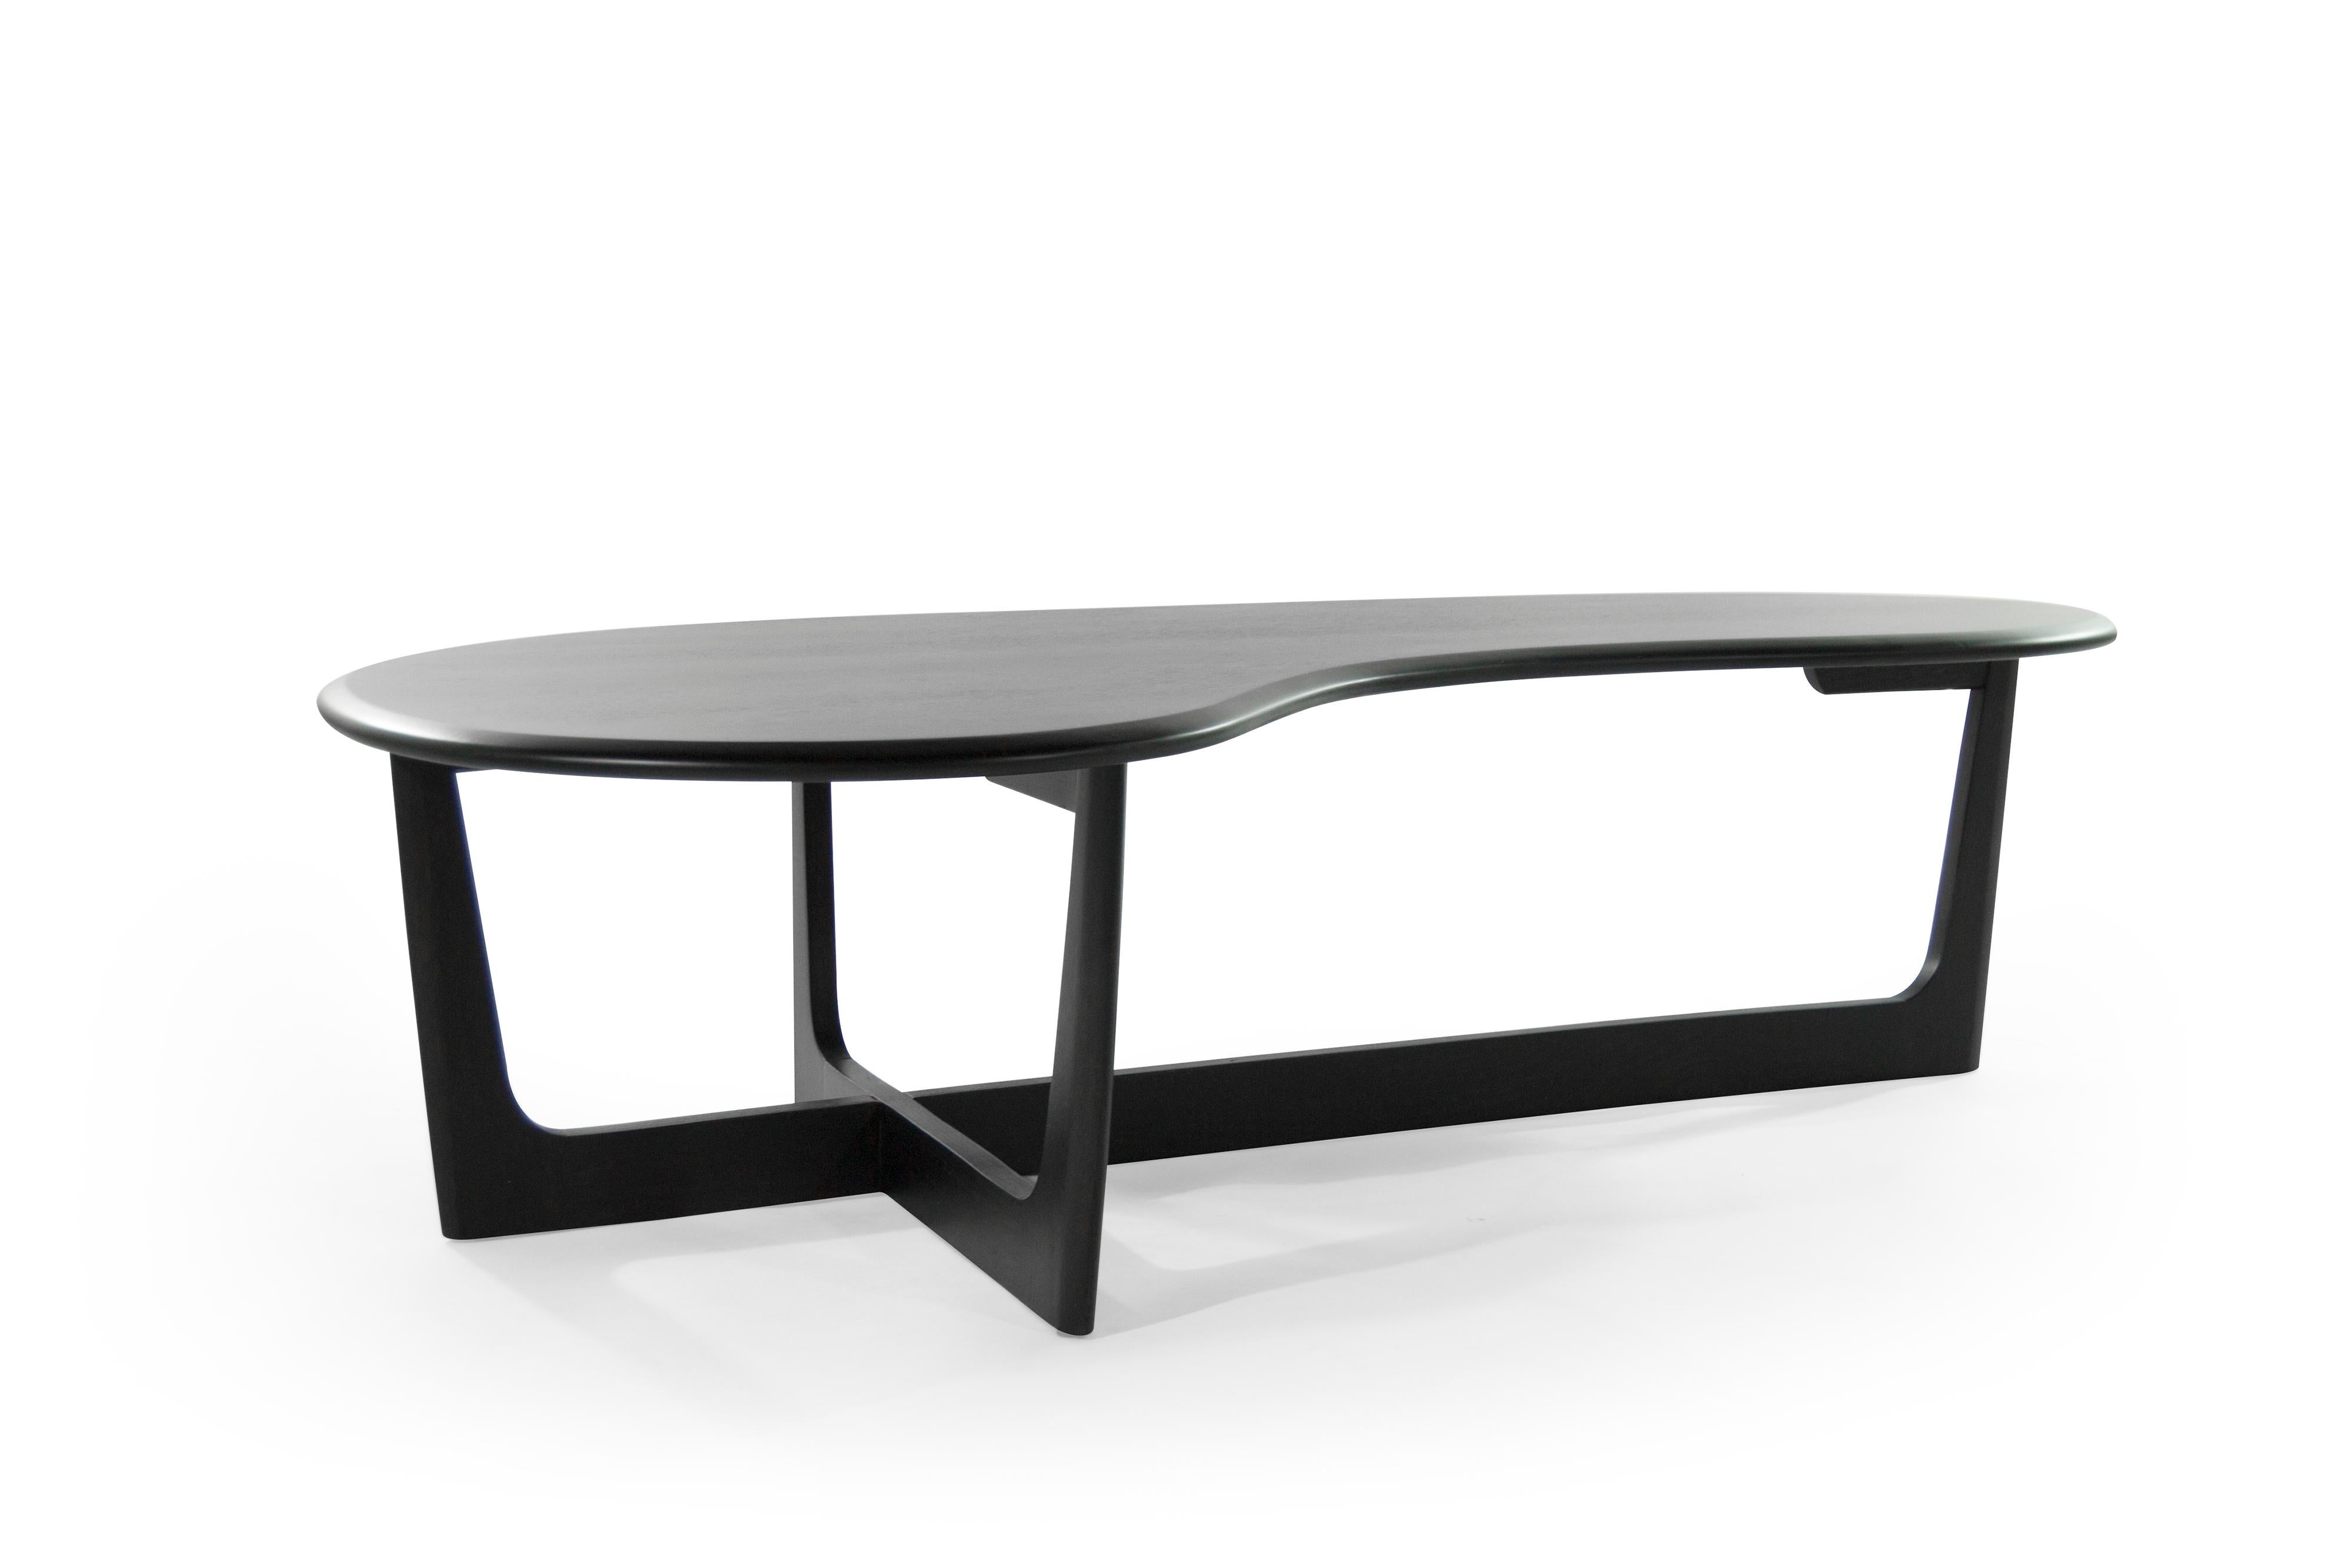 Biomorphic coffee table newly redone in an organic, stain / scratch resistant matte espresso finish.